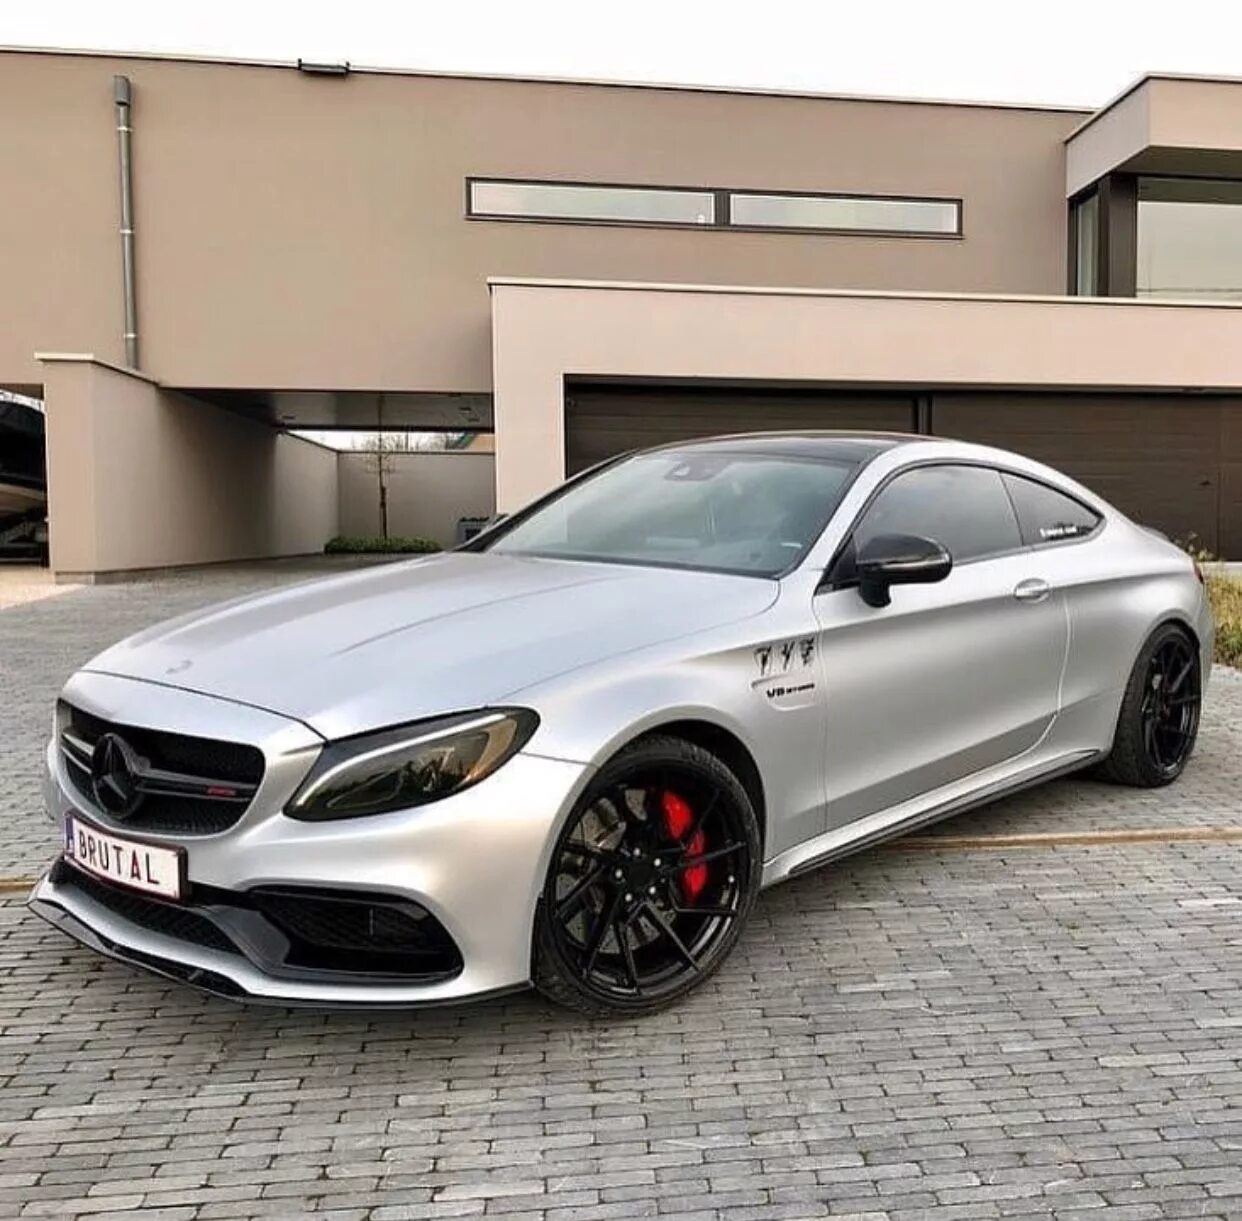 Mercedes Benz c63s AMG. Мерседес АМГ C 63 S. Мерседес Бенц АМГ 63. Мерседес-Бенц c63 AMG.